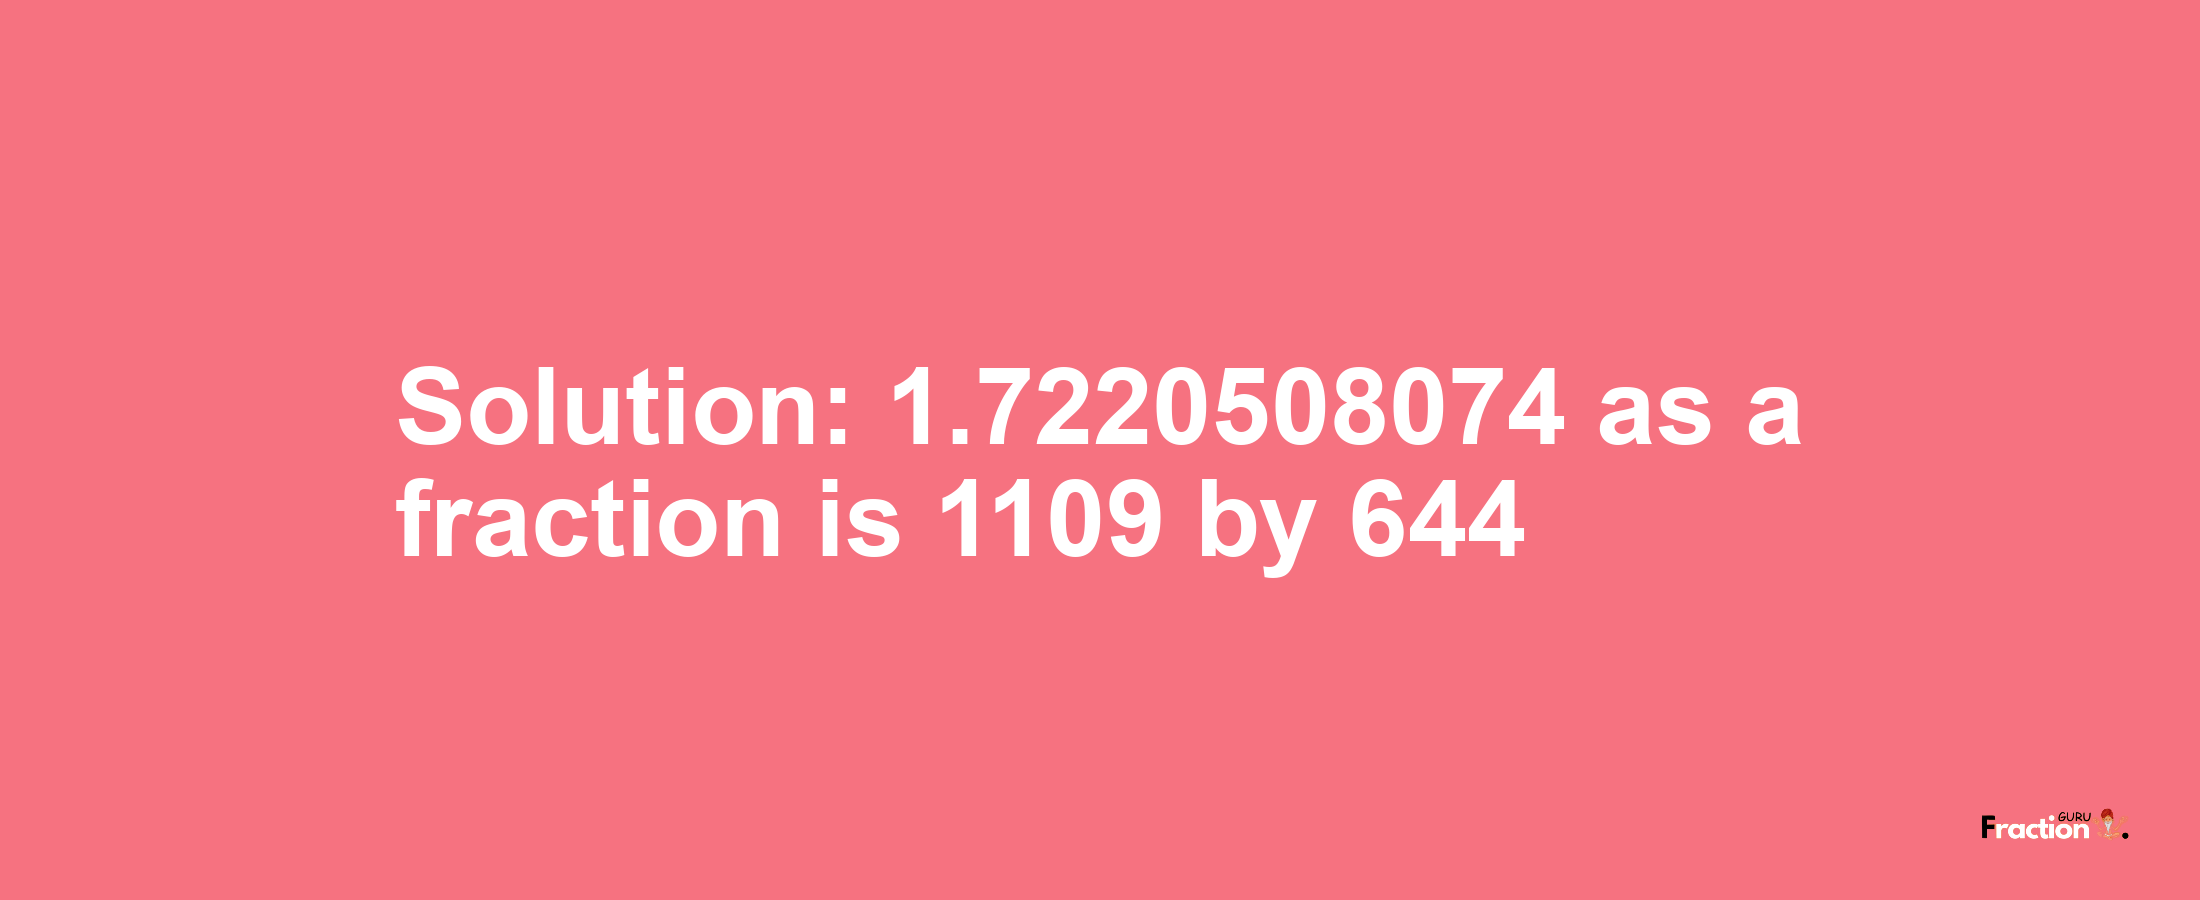 Solution:1.7220508074 as a fraction is 1109/644